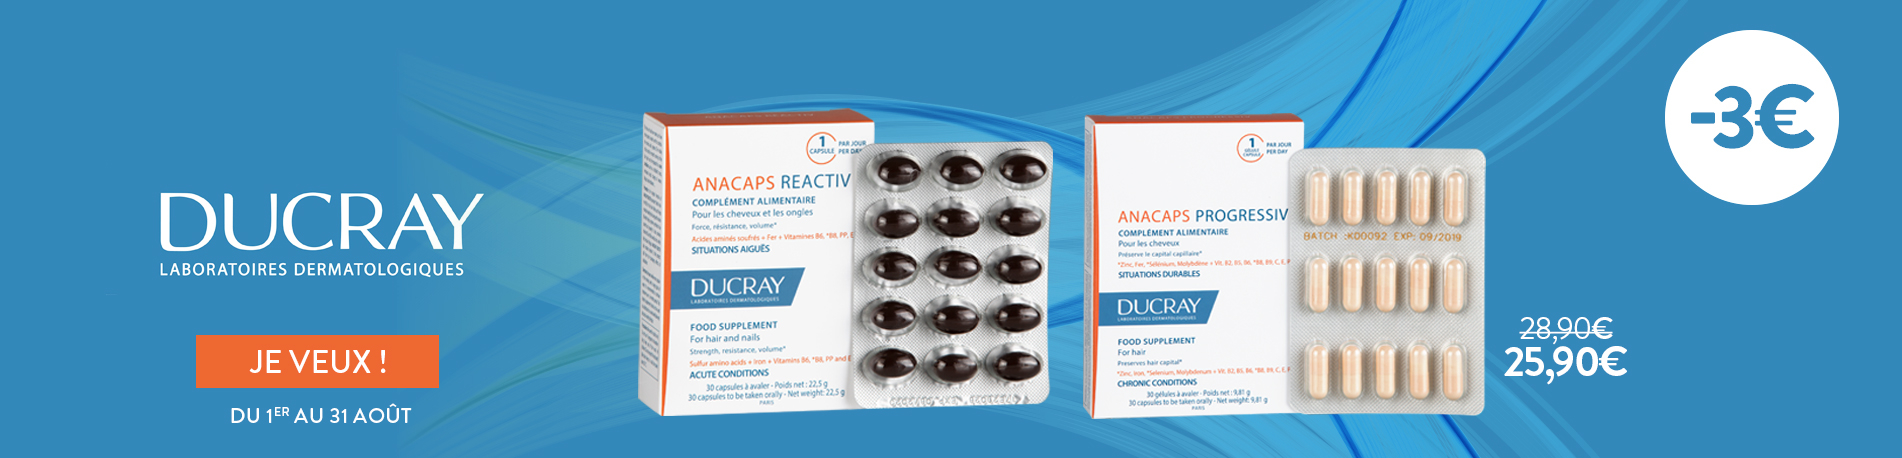 Promotion Ducray Anacaps